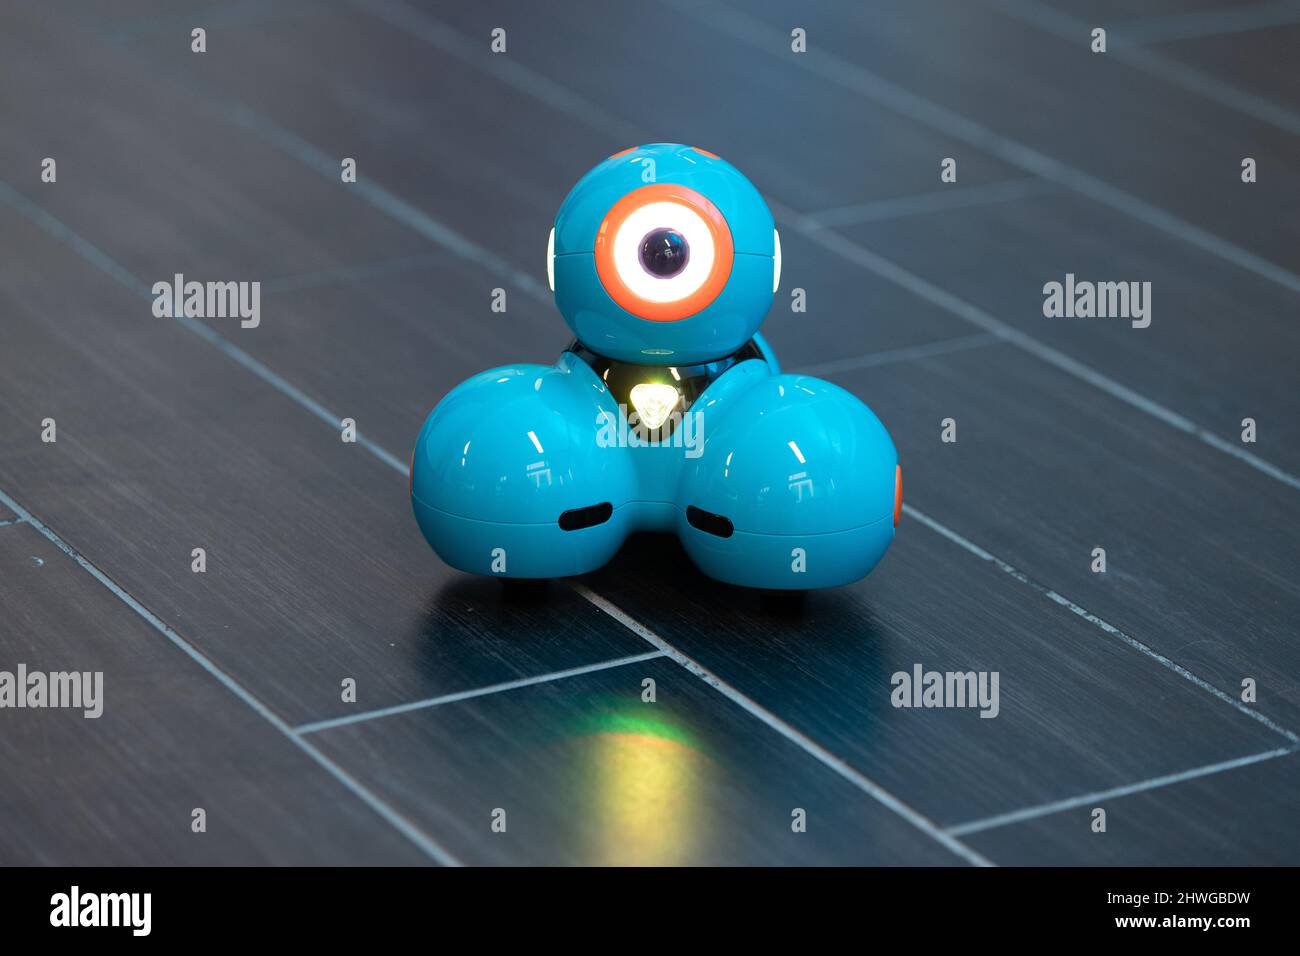 https://c8.alamy.com/comp/2HWGBDW/vechta-germany-01st-feb-2022-the-learning-robot-dash-stands-on-the-floor-of-the-robolab-moin-veroza-at-the-university-of-vechta-interested-parties-can-touch-and-try-out-robots-there-and-familiarize-themselves-with-the-technology-fears-of-digital-progress-are-to-be-reduced-in-this-way-credit-friso-gentschdpaalamy-live-news-2HWGBDW.jpg